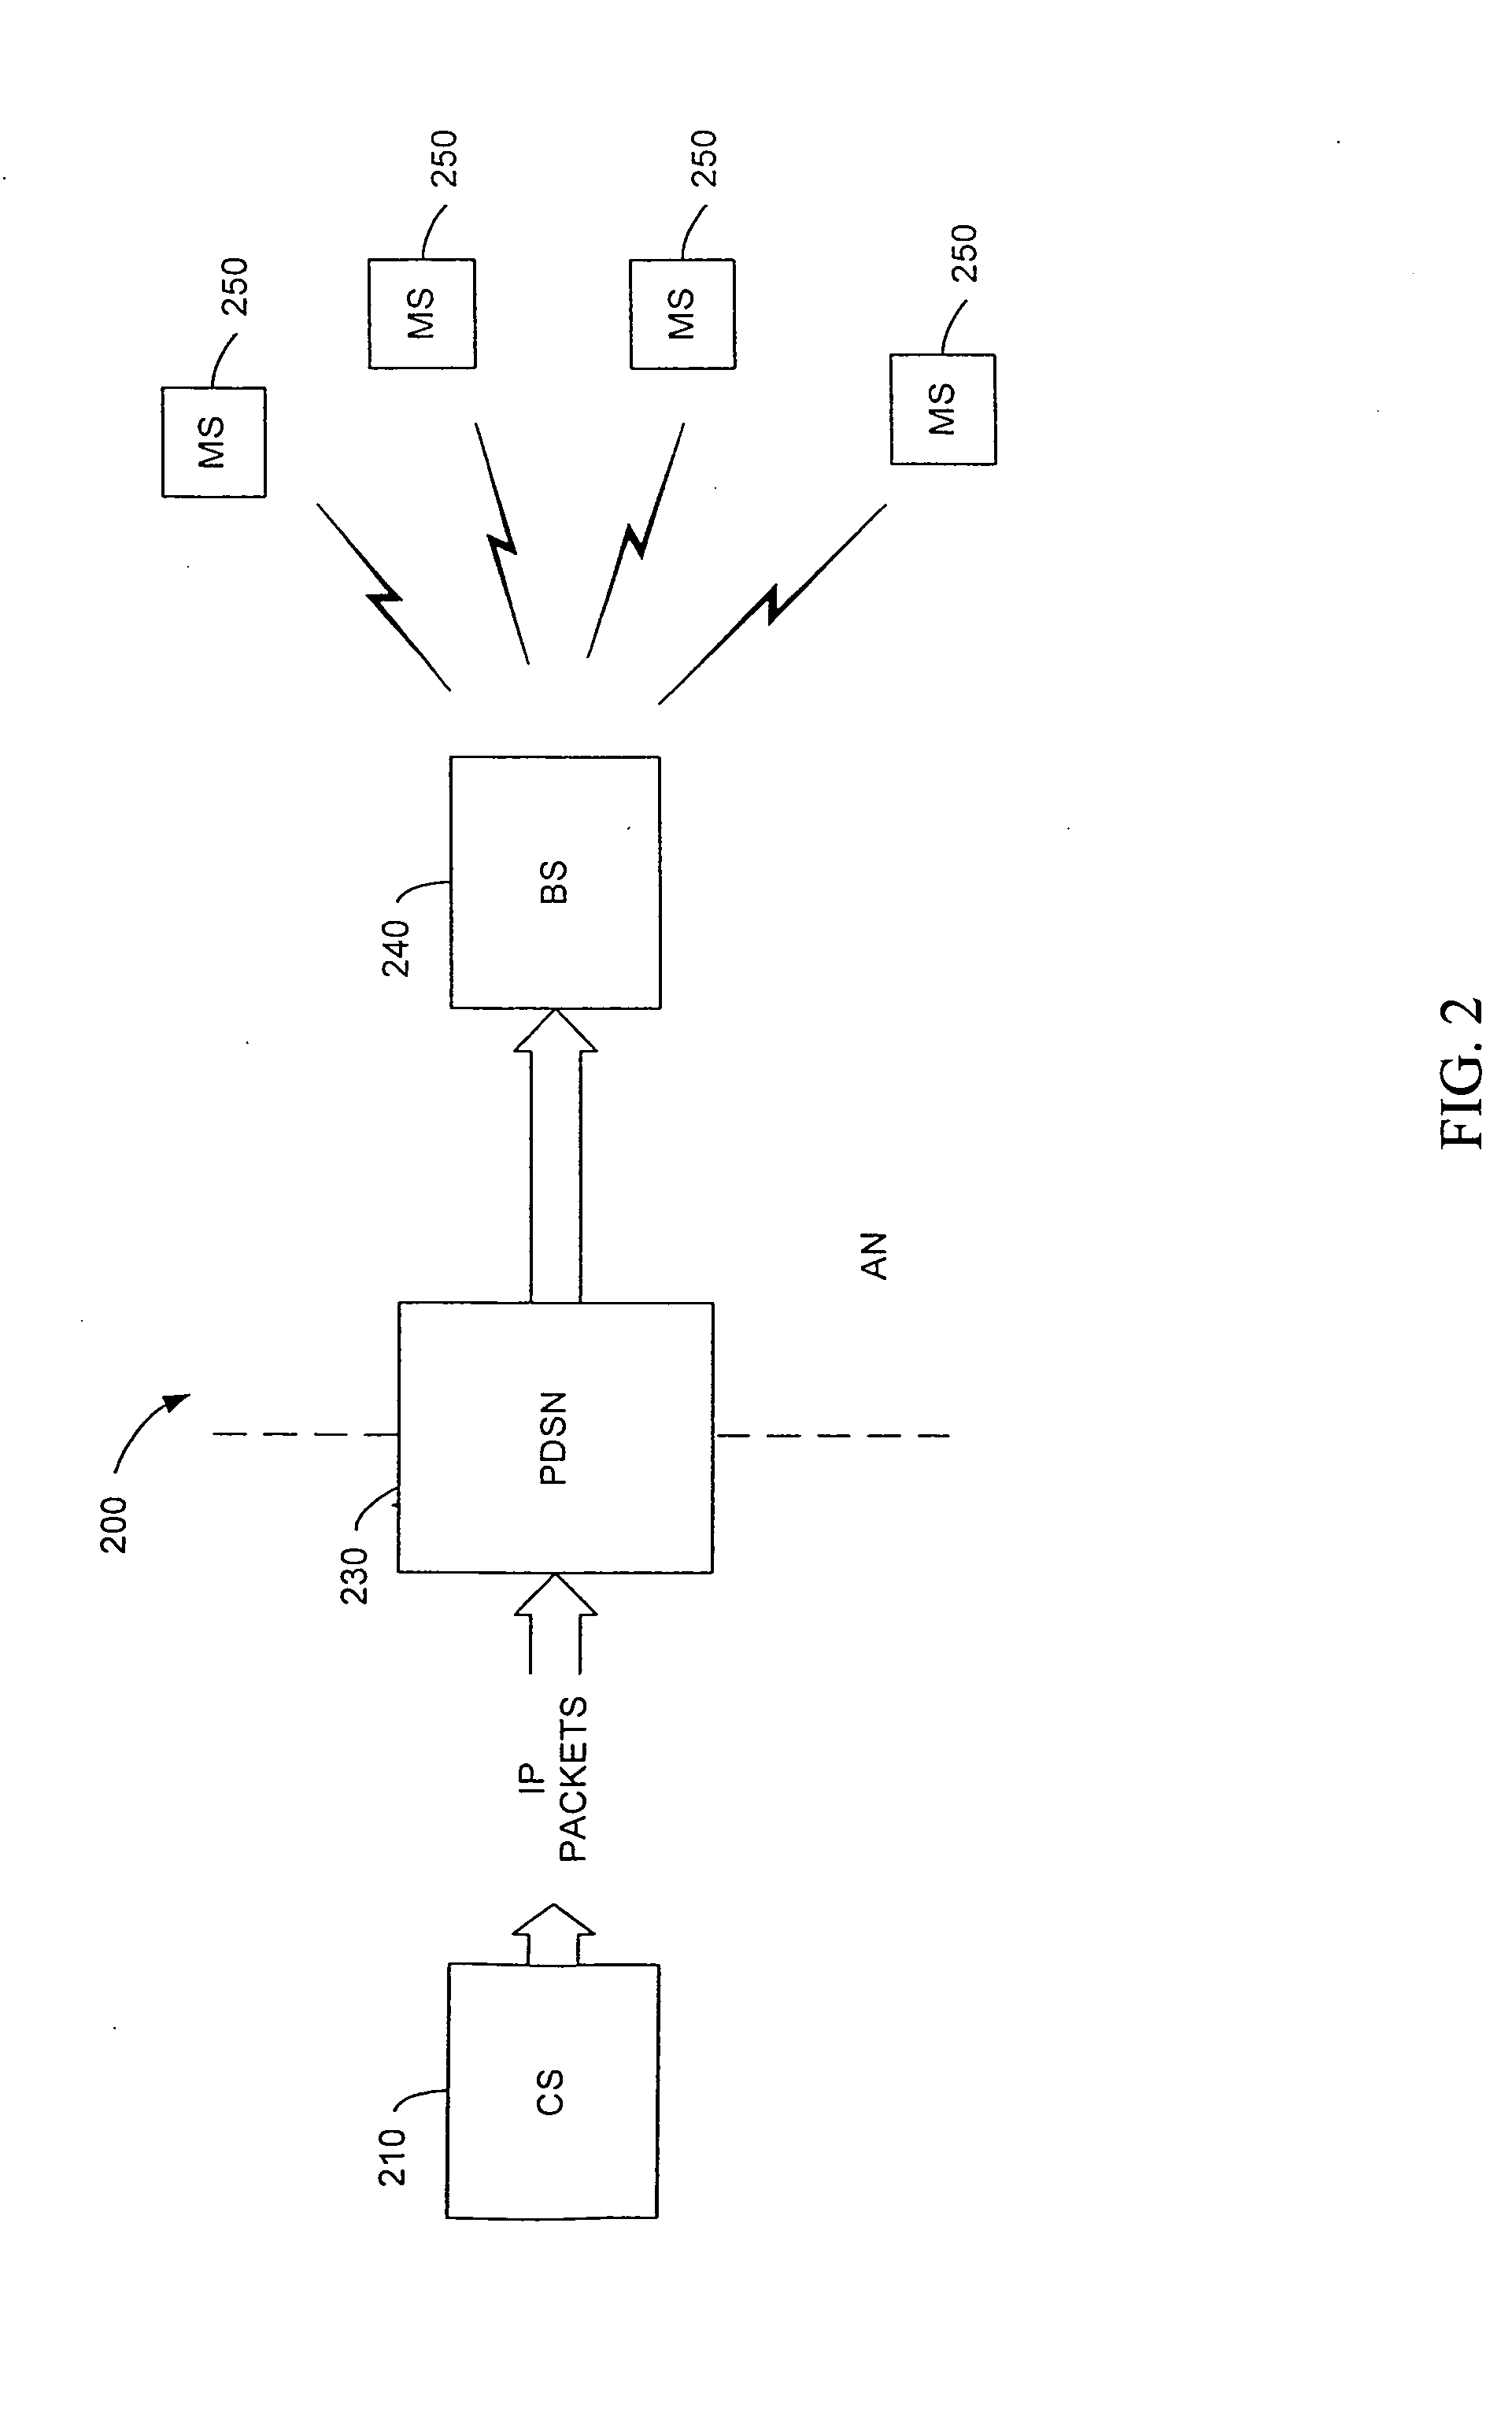 Apparatus and method for a secure broadcast system